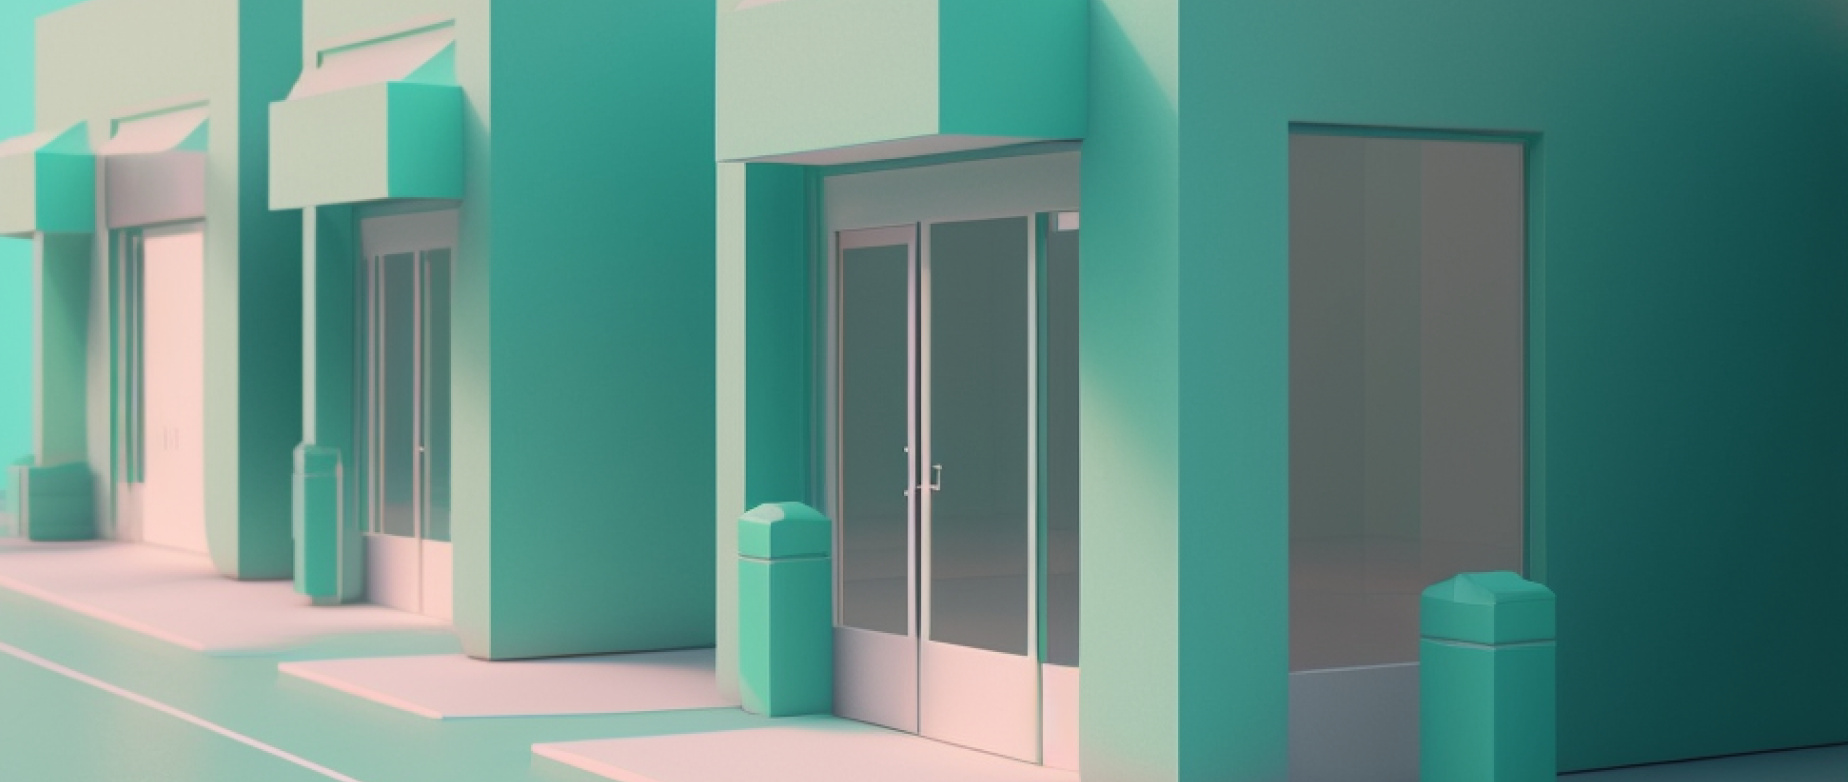 A image of seafoam green and light pink buildings and storefronts to represent retail software